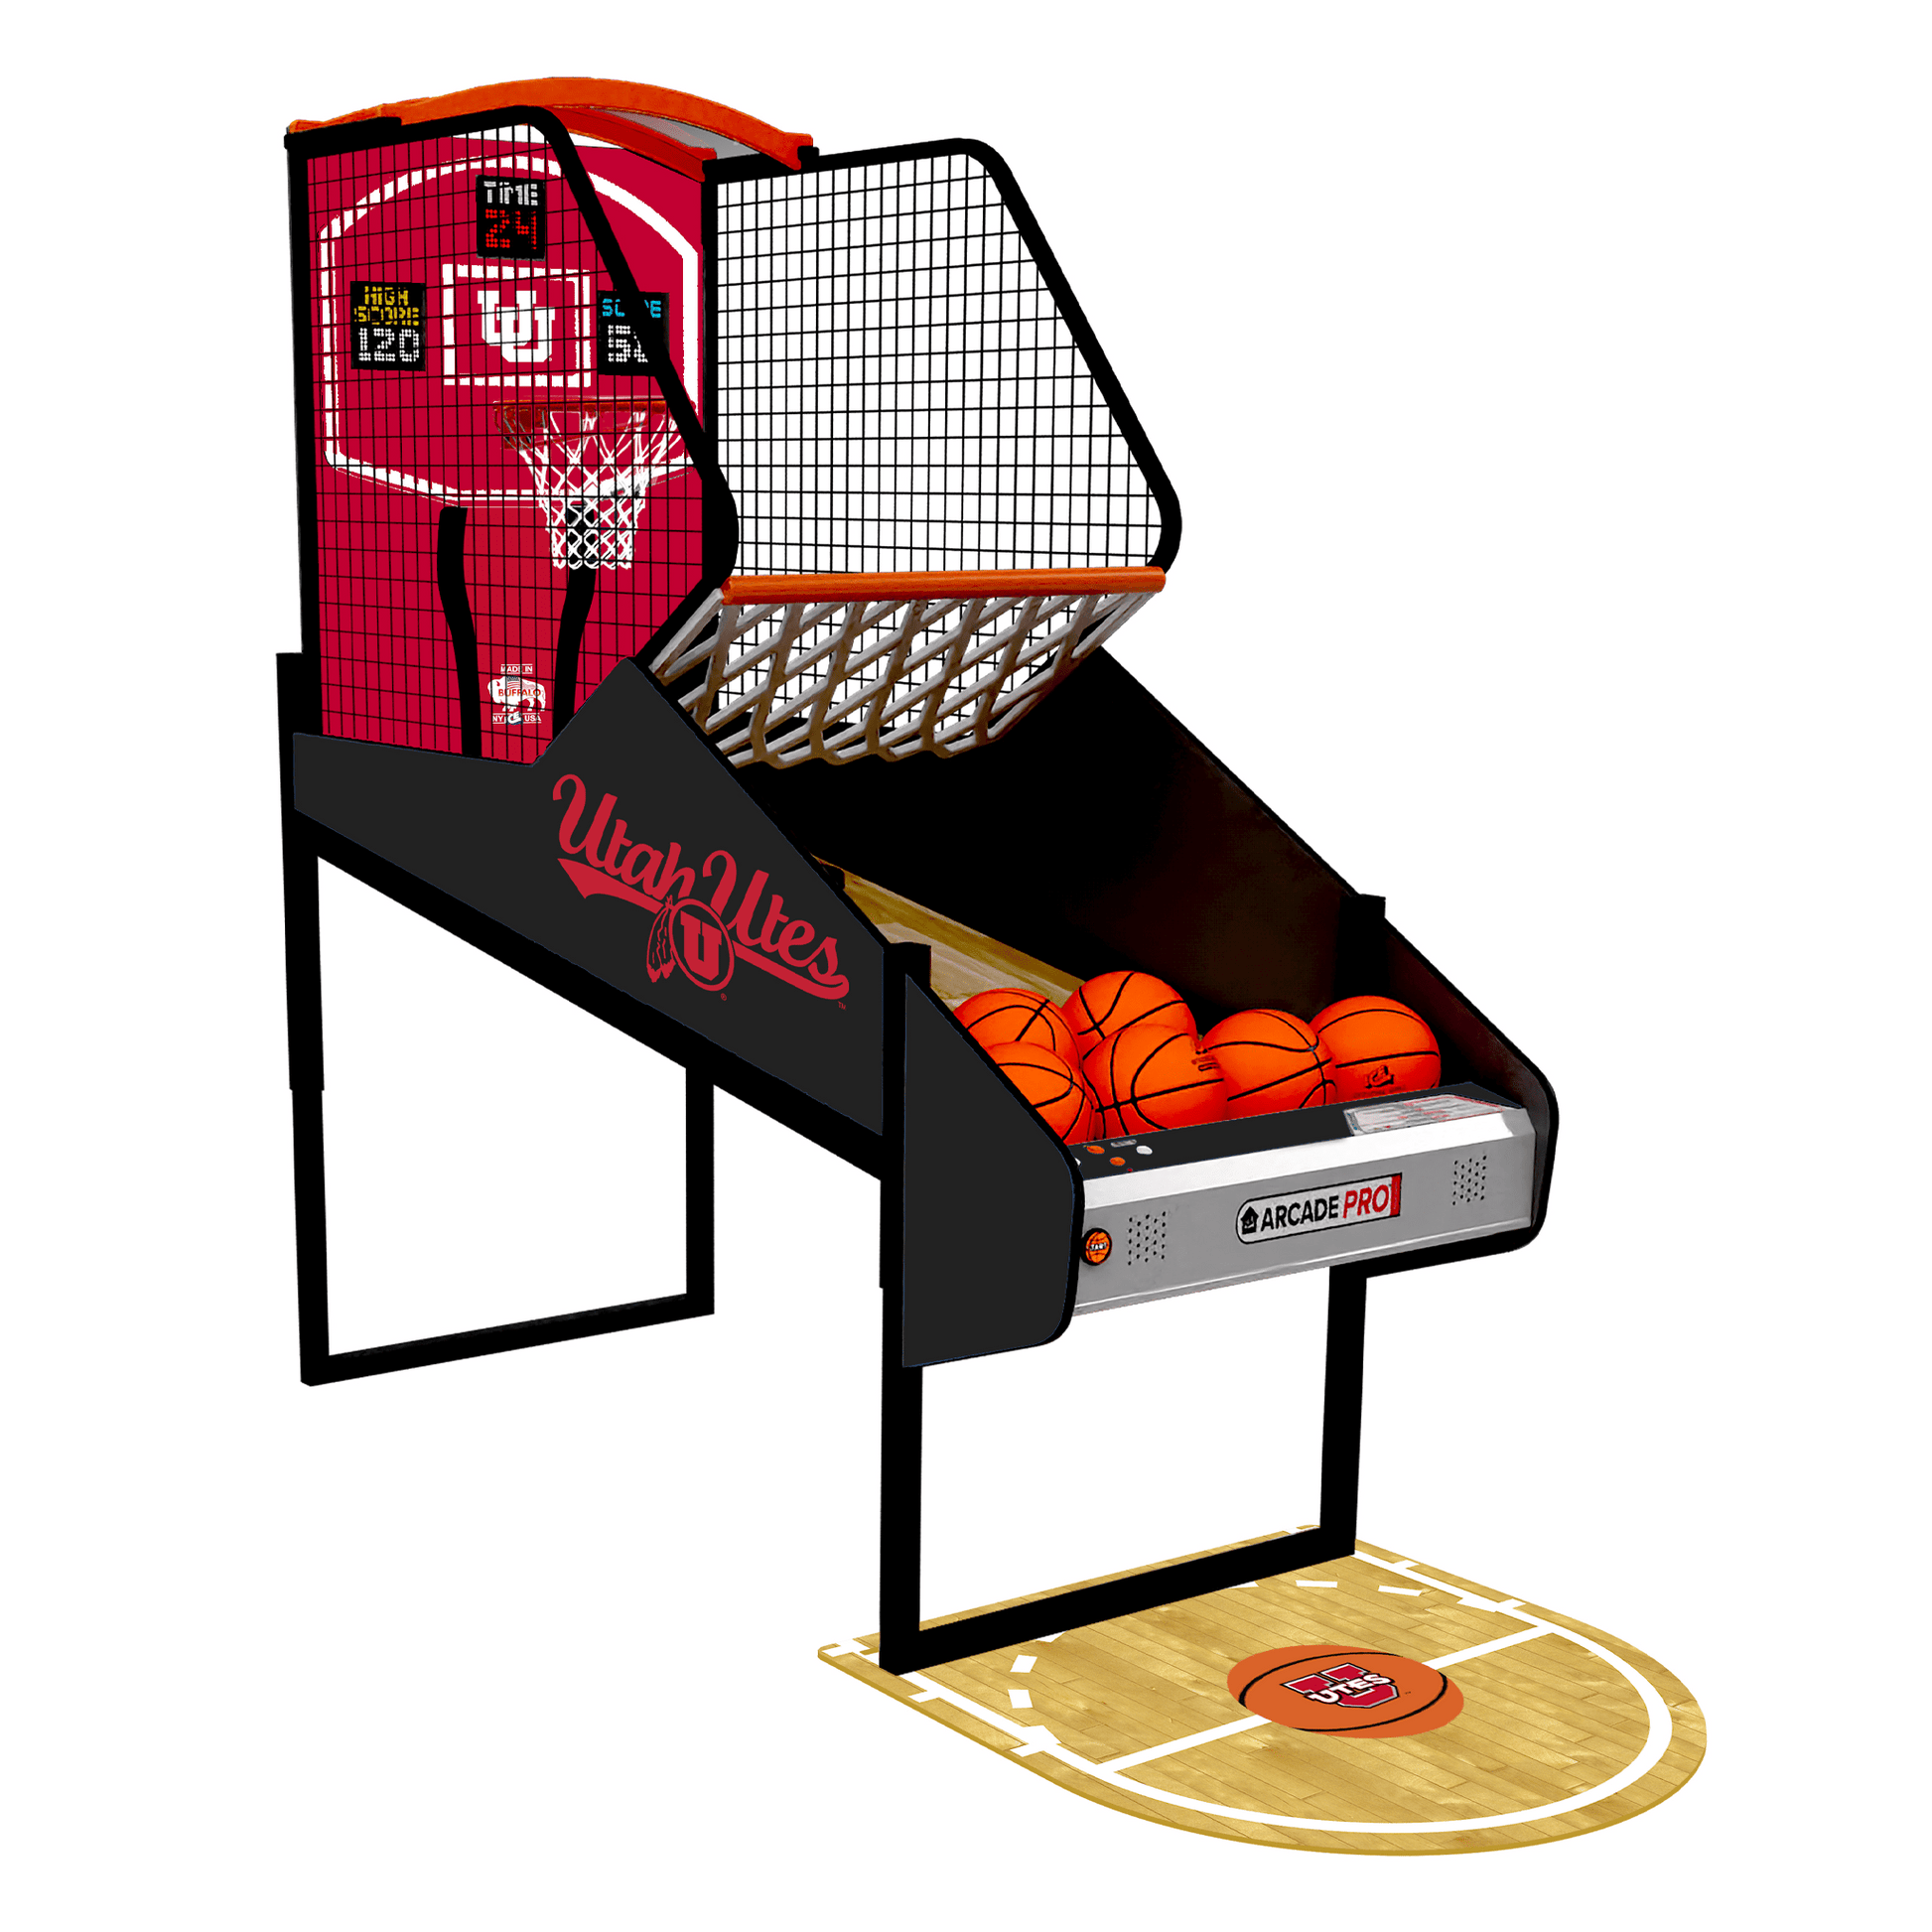 University of Utah Utes College Hoops Arcade Innovative Concepts in Entertainment   